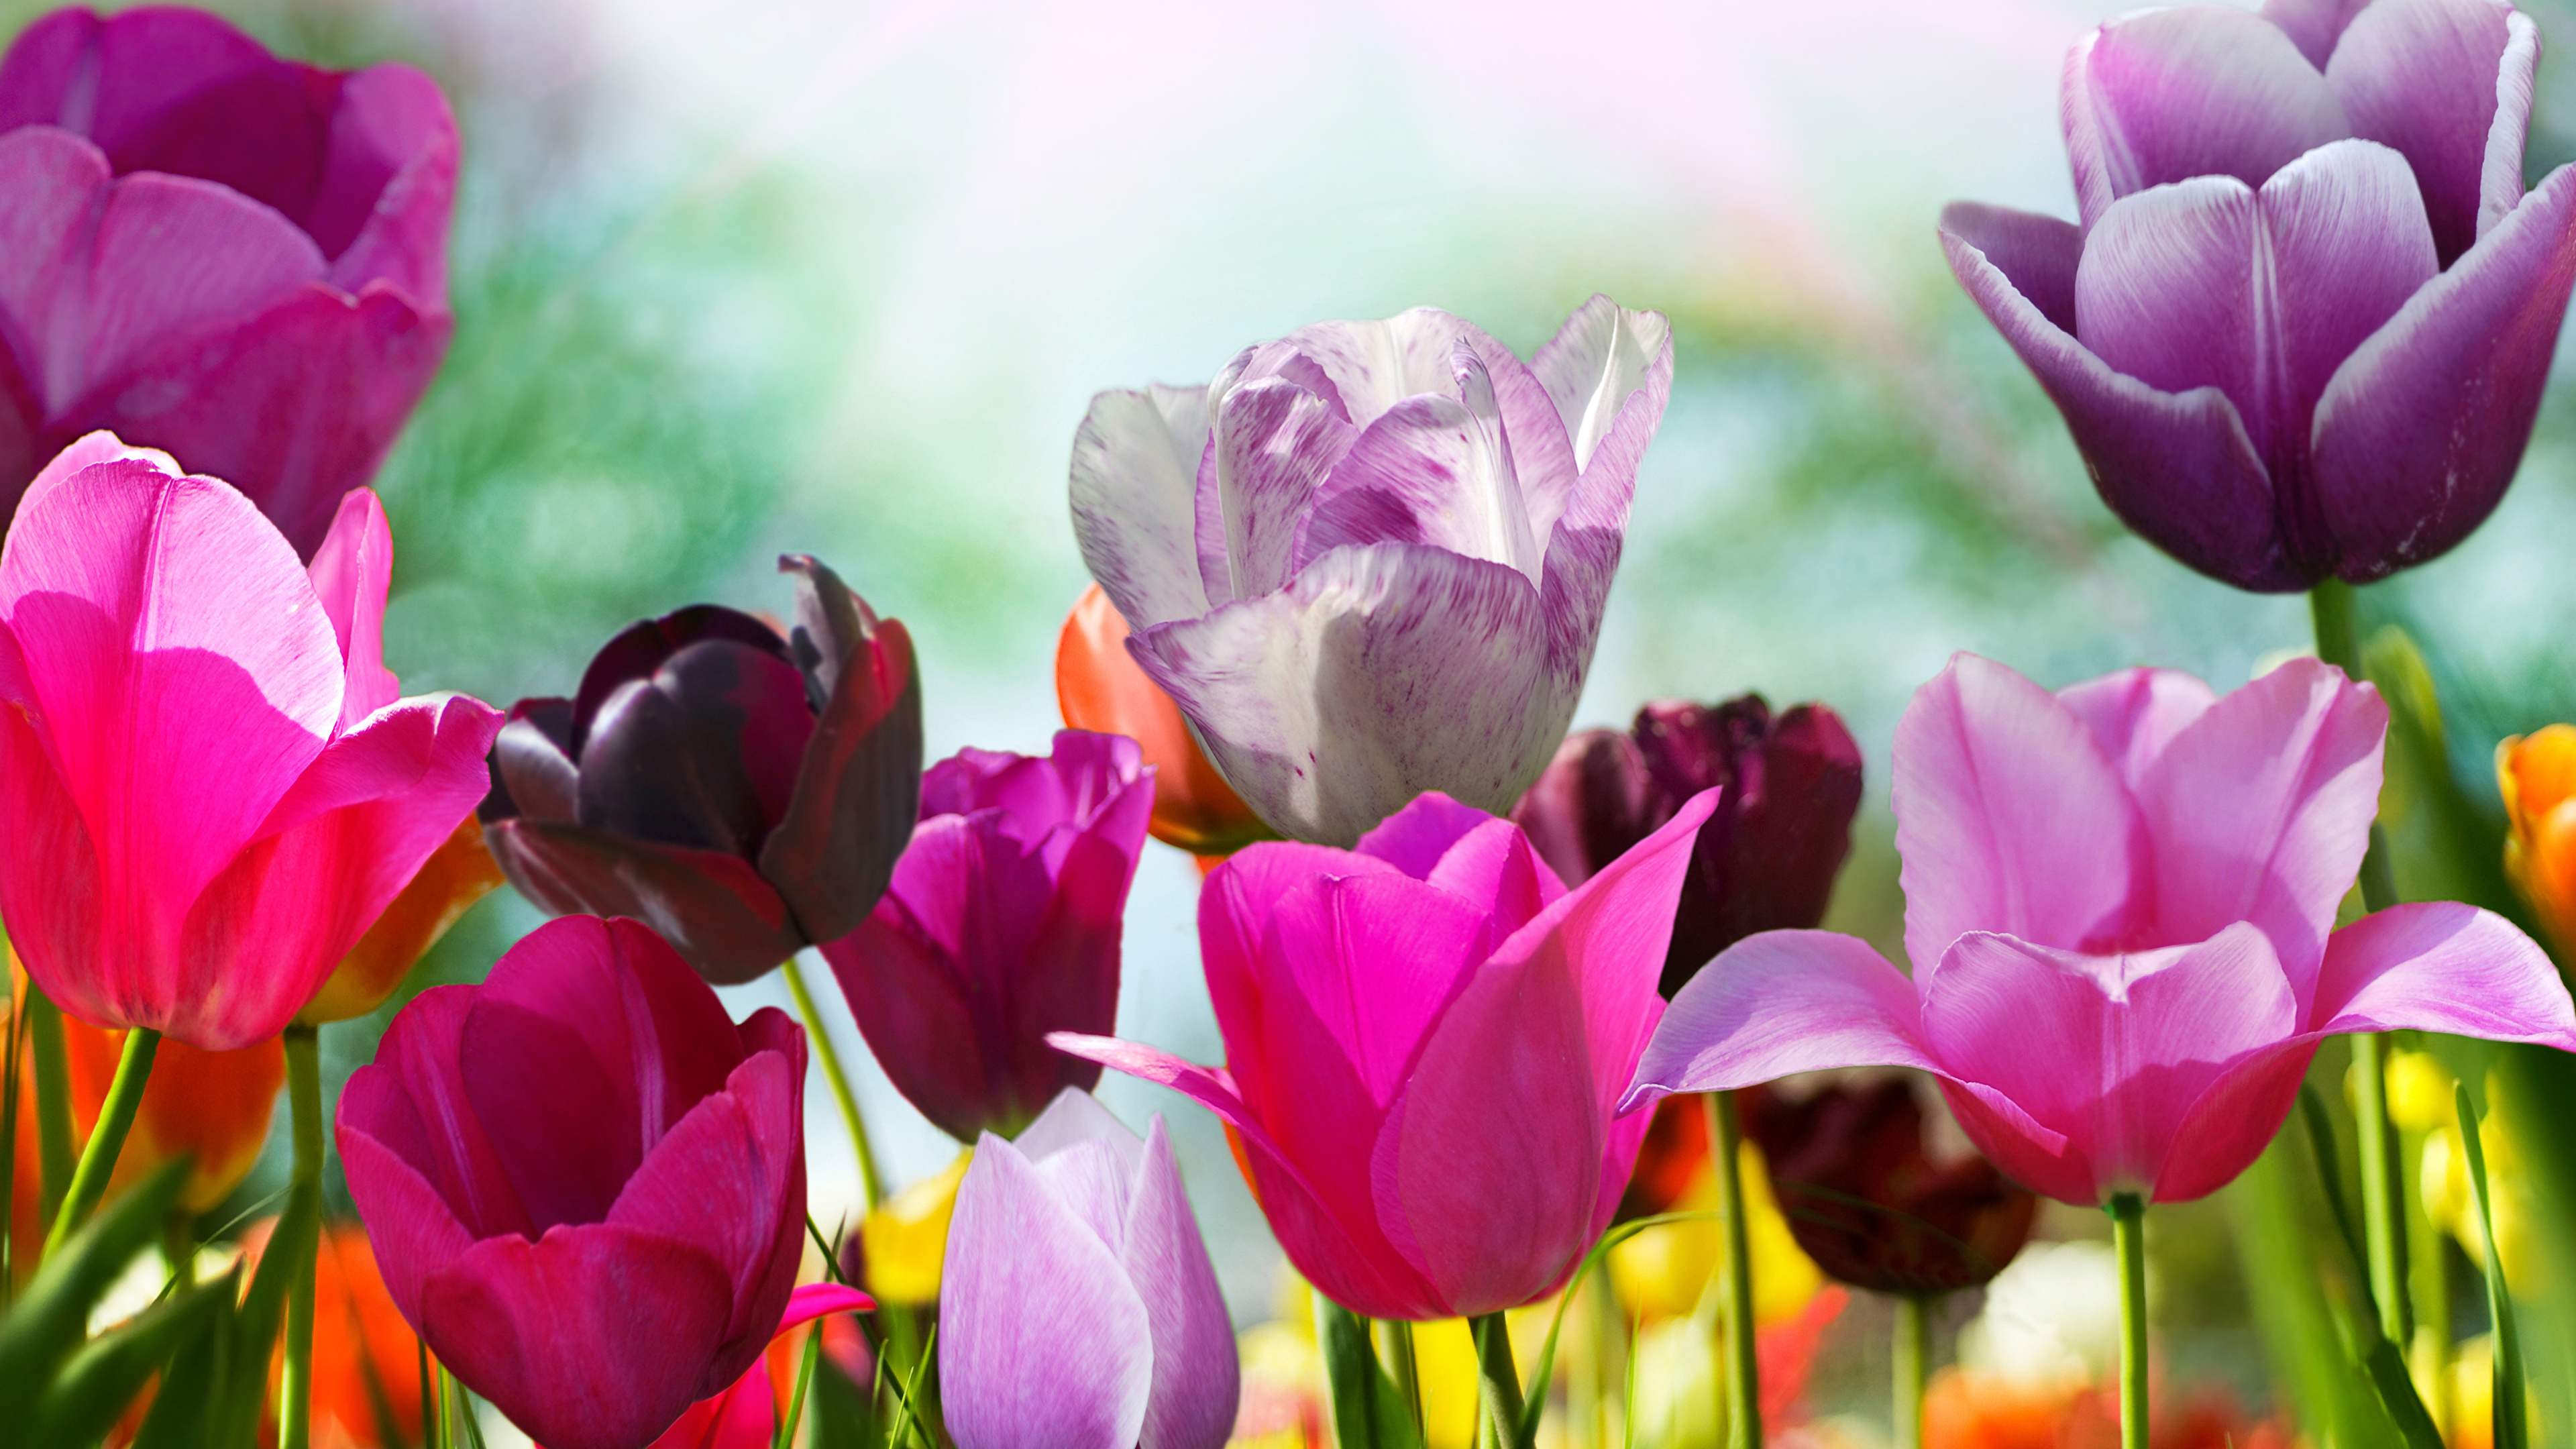 Purple and Pink Tulips in Bloom During Daytime. Wallpaper in 3840x2160 Resolution